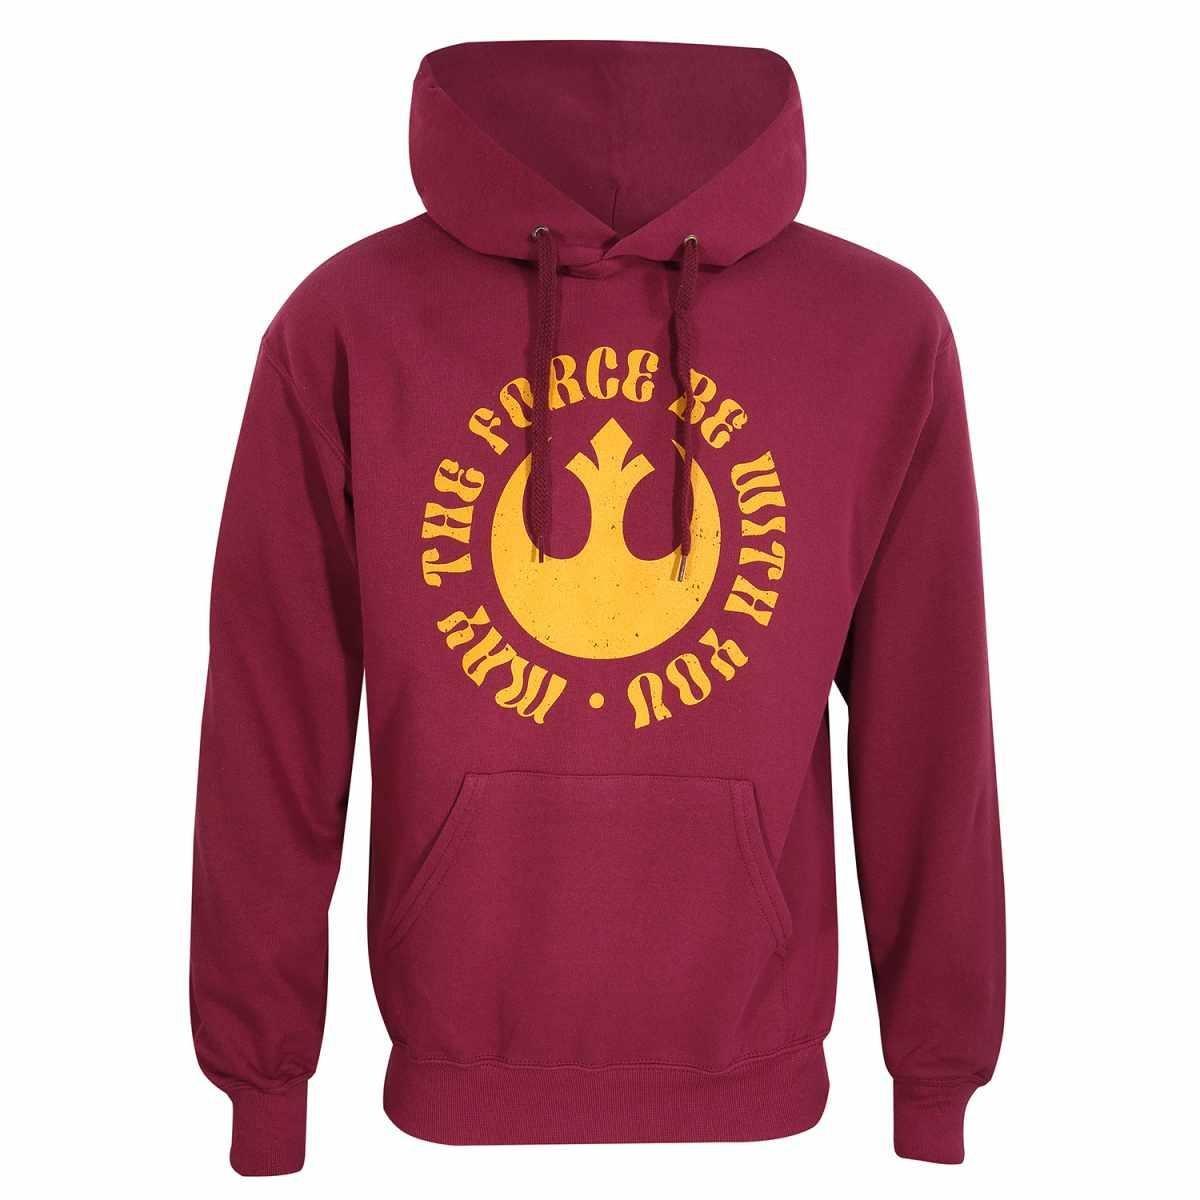 May The Force Be With You Kapuzenpullover Damen Rot Bunt S von STAR WARS